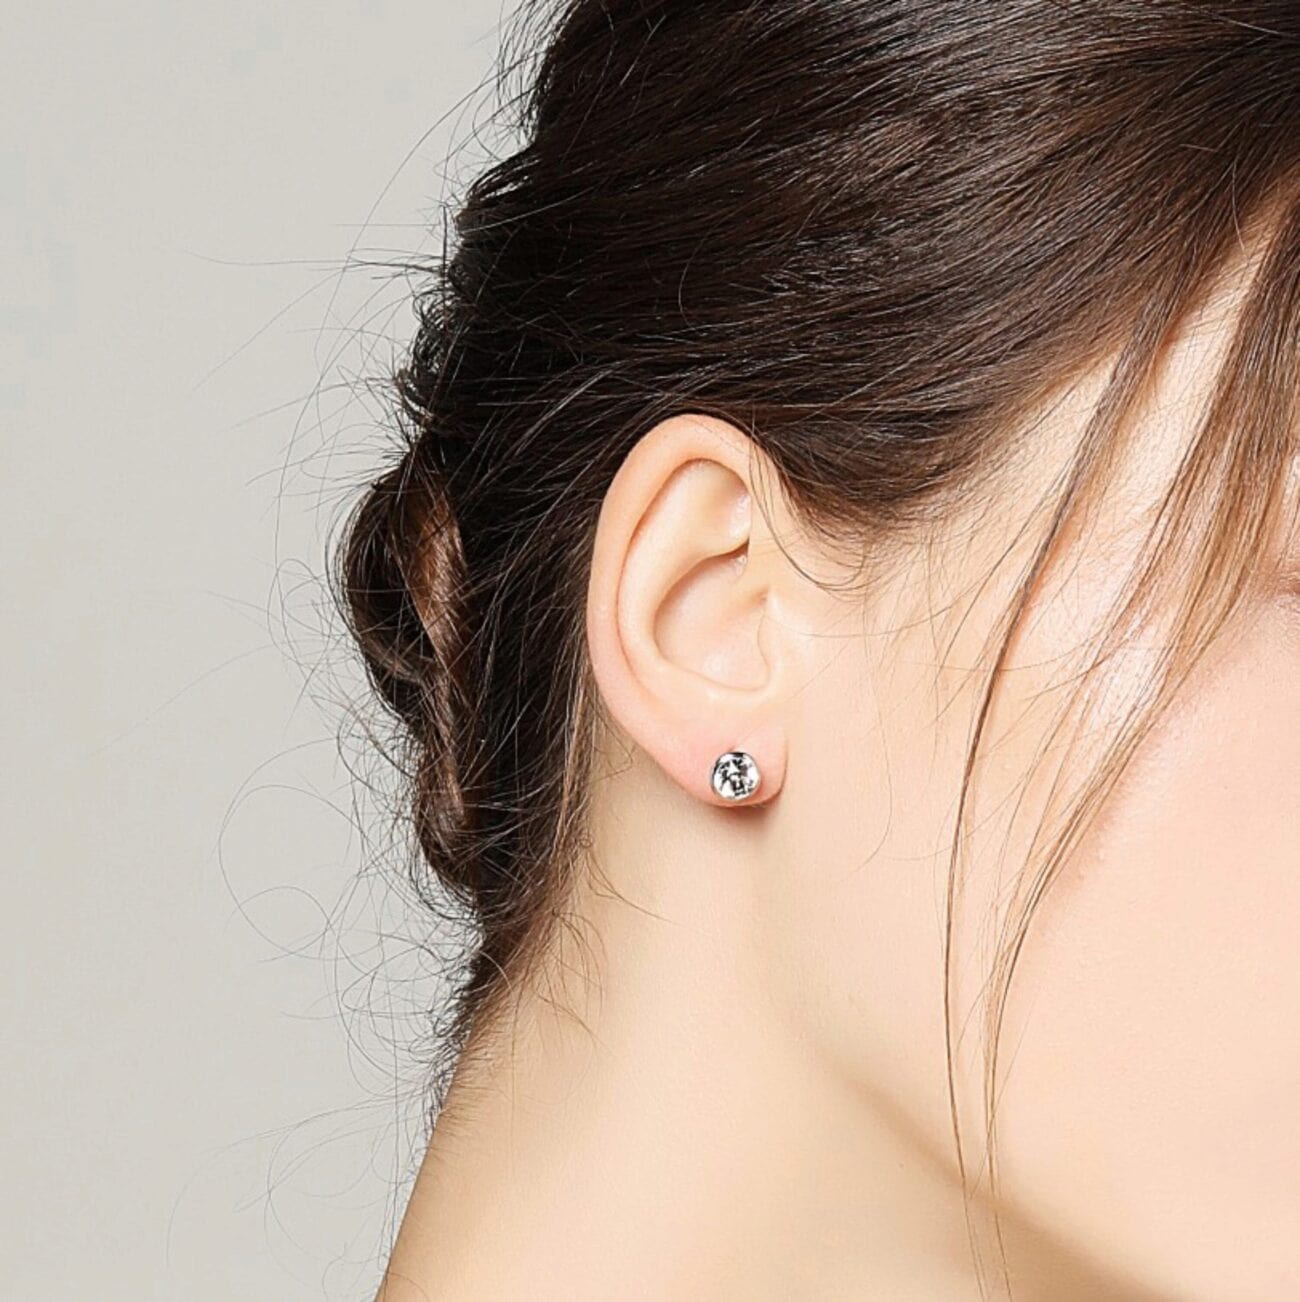 EAR-SS Stainless Steel Stud Earrings with Clear Crystals.